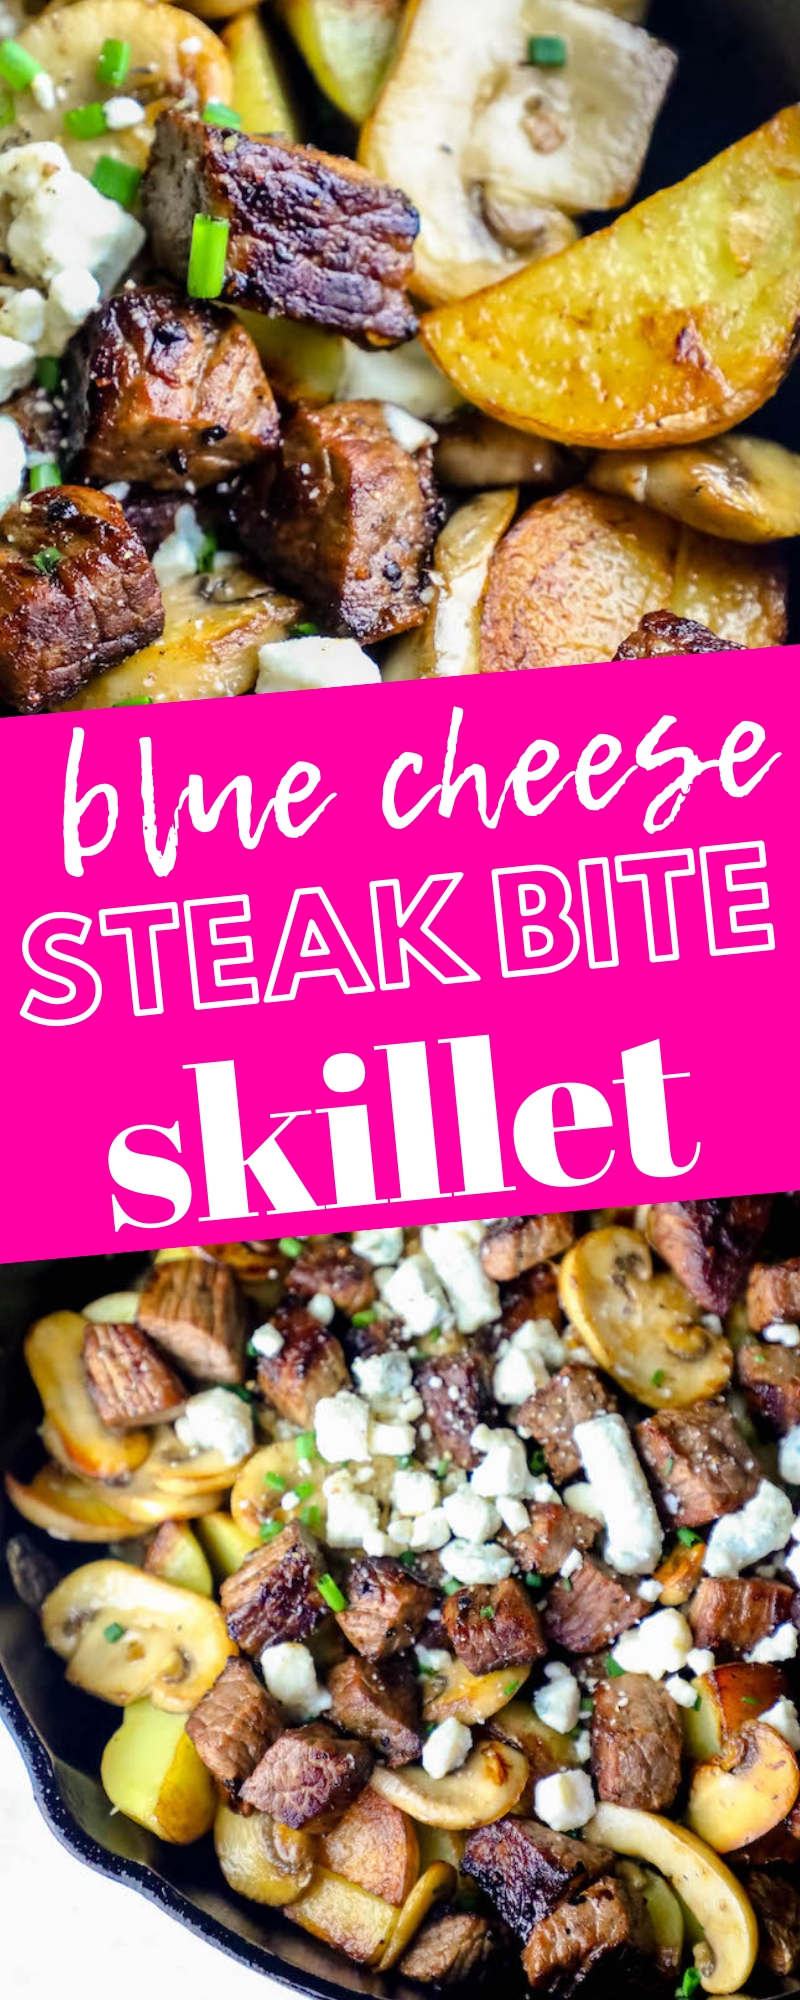 Blue Cheese Steak Bites and Potatoes Skillet Dinner Recipe Picture